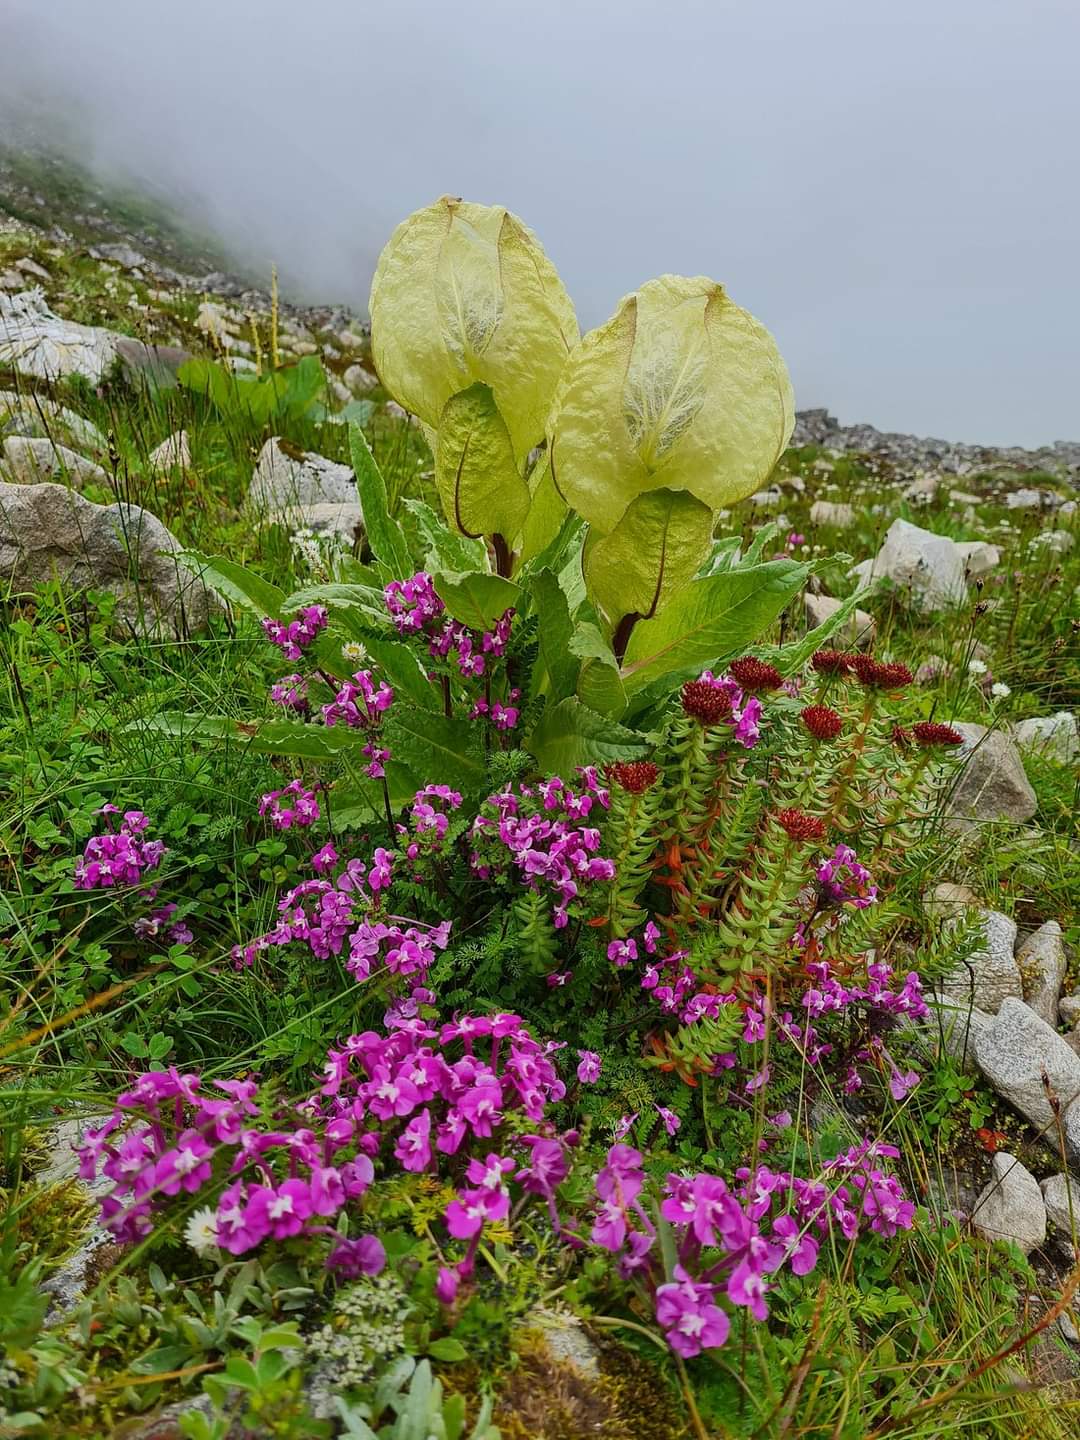 Valley of Flowers National Park in Himalayas